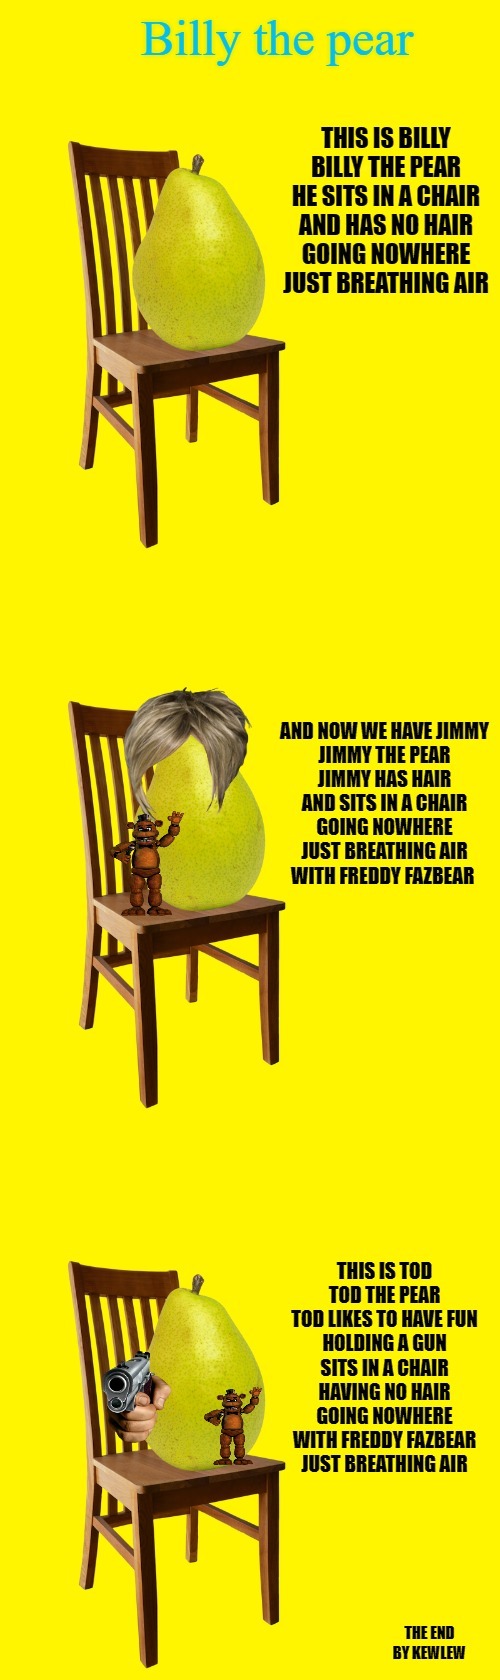 A pear in a chair | image tagged in pear,chair,kewlew | made w/ Imgflip meme maker